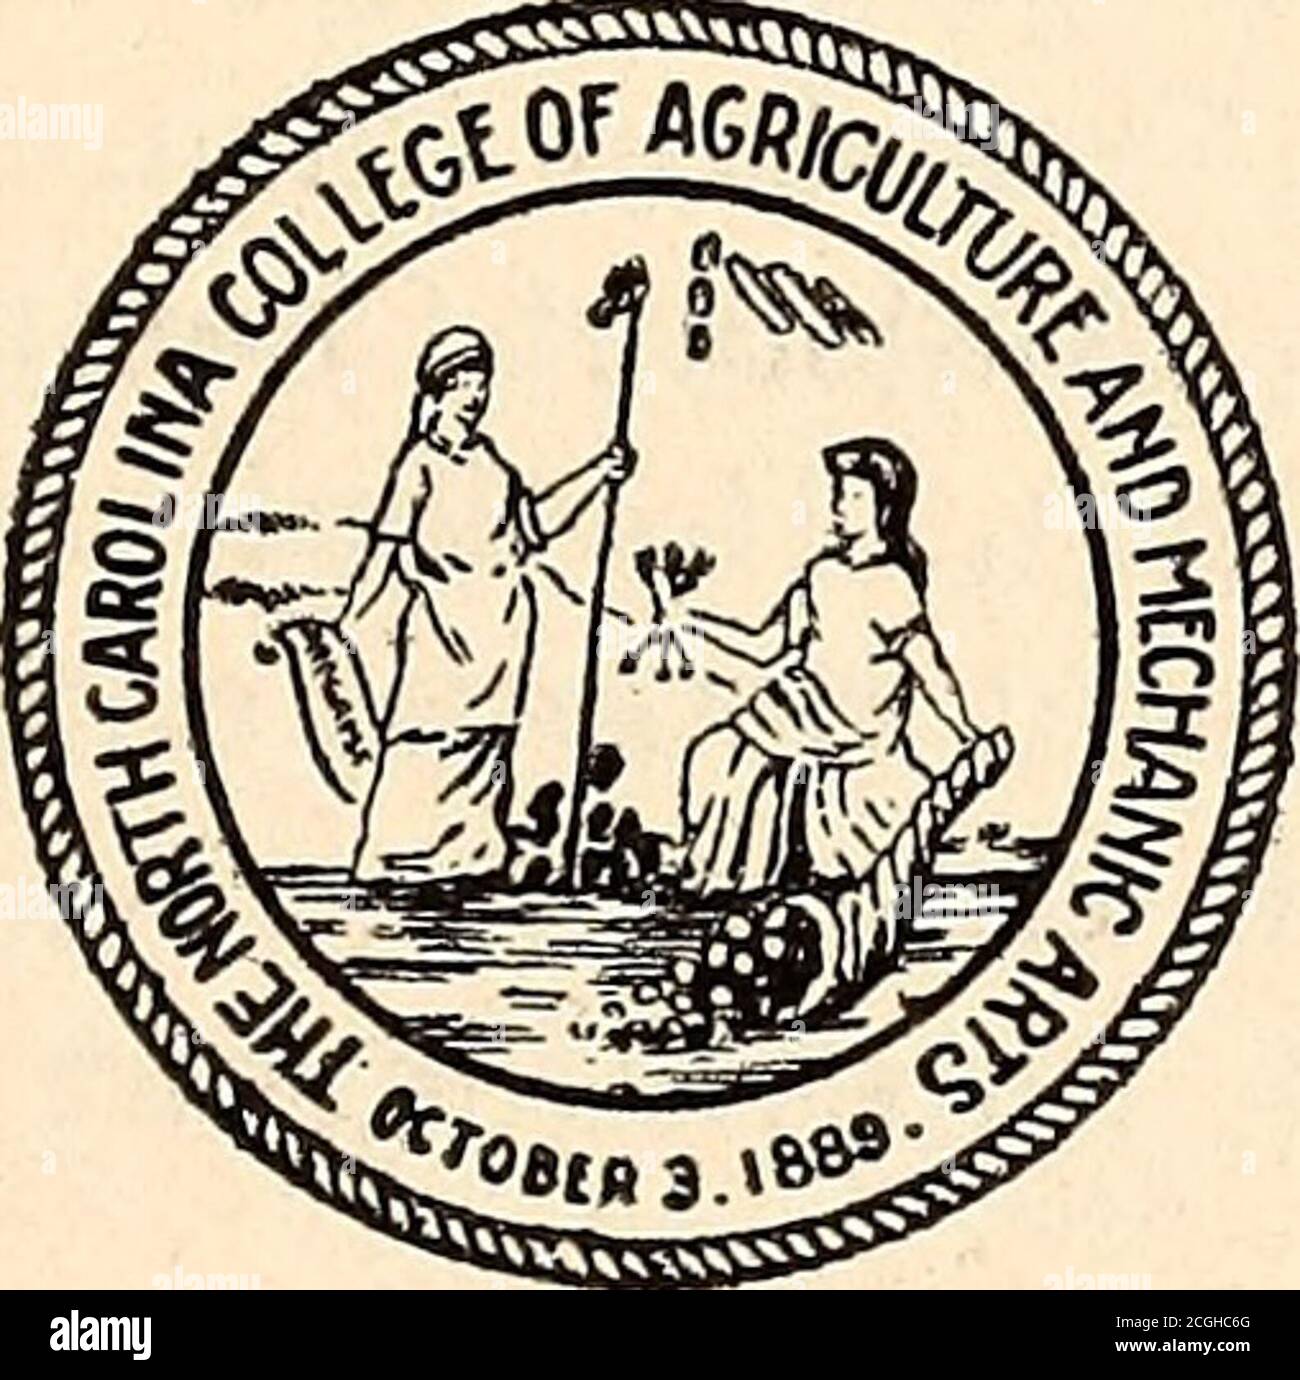 . Annual report of the North Carolina Agricultural Experiment Station . 1 CO z cs o LO Tf QO LO 00 O IO •&lt;* *OS O CO * 00 ■* O rH © o OS -H O CM I CO rH I O O CM CM GO o o CM rH 00 LO I CO 00 CO LO-tf 00LO CMTF CM 00 OSLO ^T1 CM - cp il 0 CM i-H ^H 10 IO LOCI T3 -w PCh Bulletin No. 173 June, 1900 THE NORTH CAROLINA College of Agriculture and Mechanic Arts Agricultural Experiment Station Department GEO. T. WINSTON, A.M., LL.D., Director. Another Warning in Regardto Compost Peddlers. W. A. WITHERS.. WEST RALEIGH, N. C.621 Publications will be sent to any address in JNorth Carolina upon appli Stock Photo